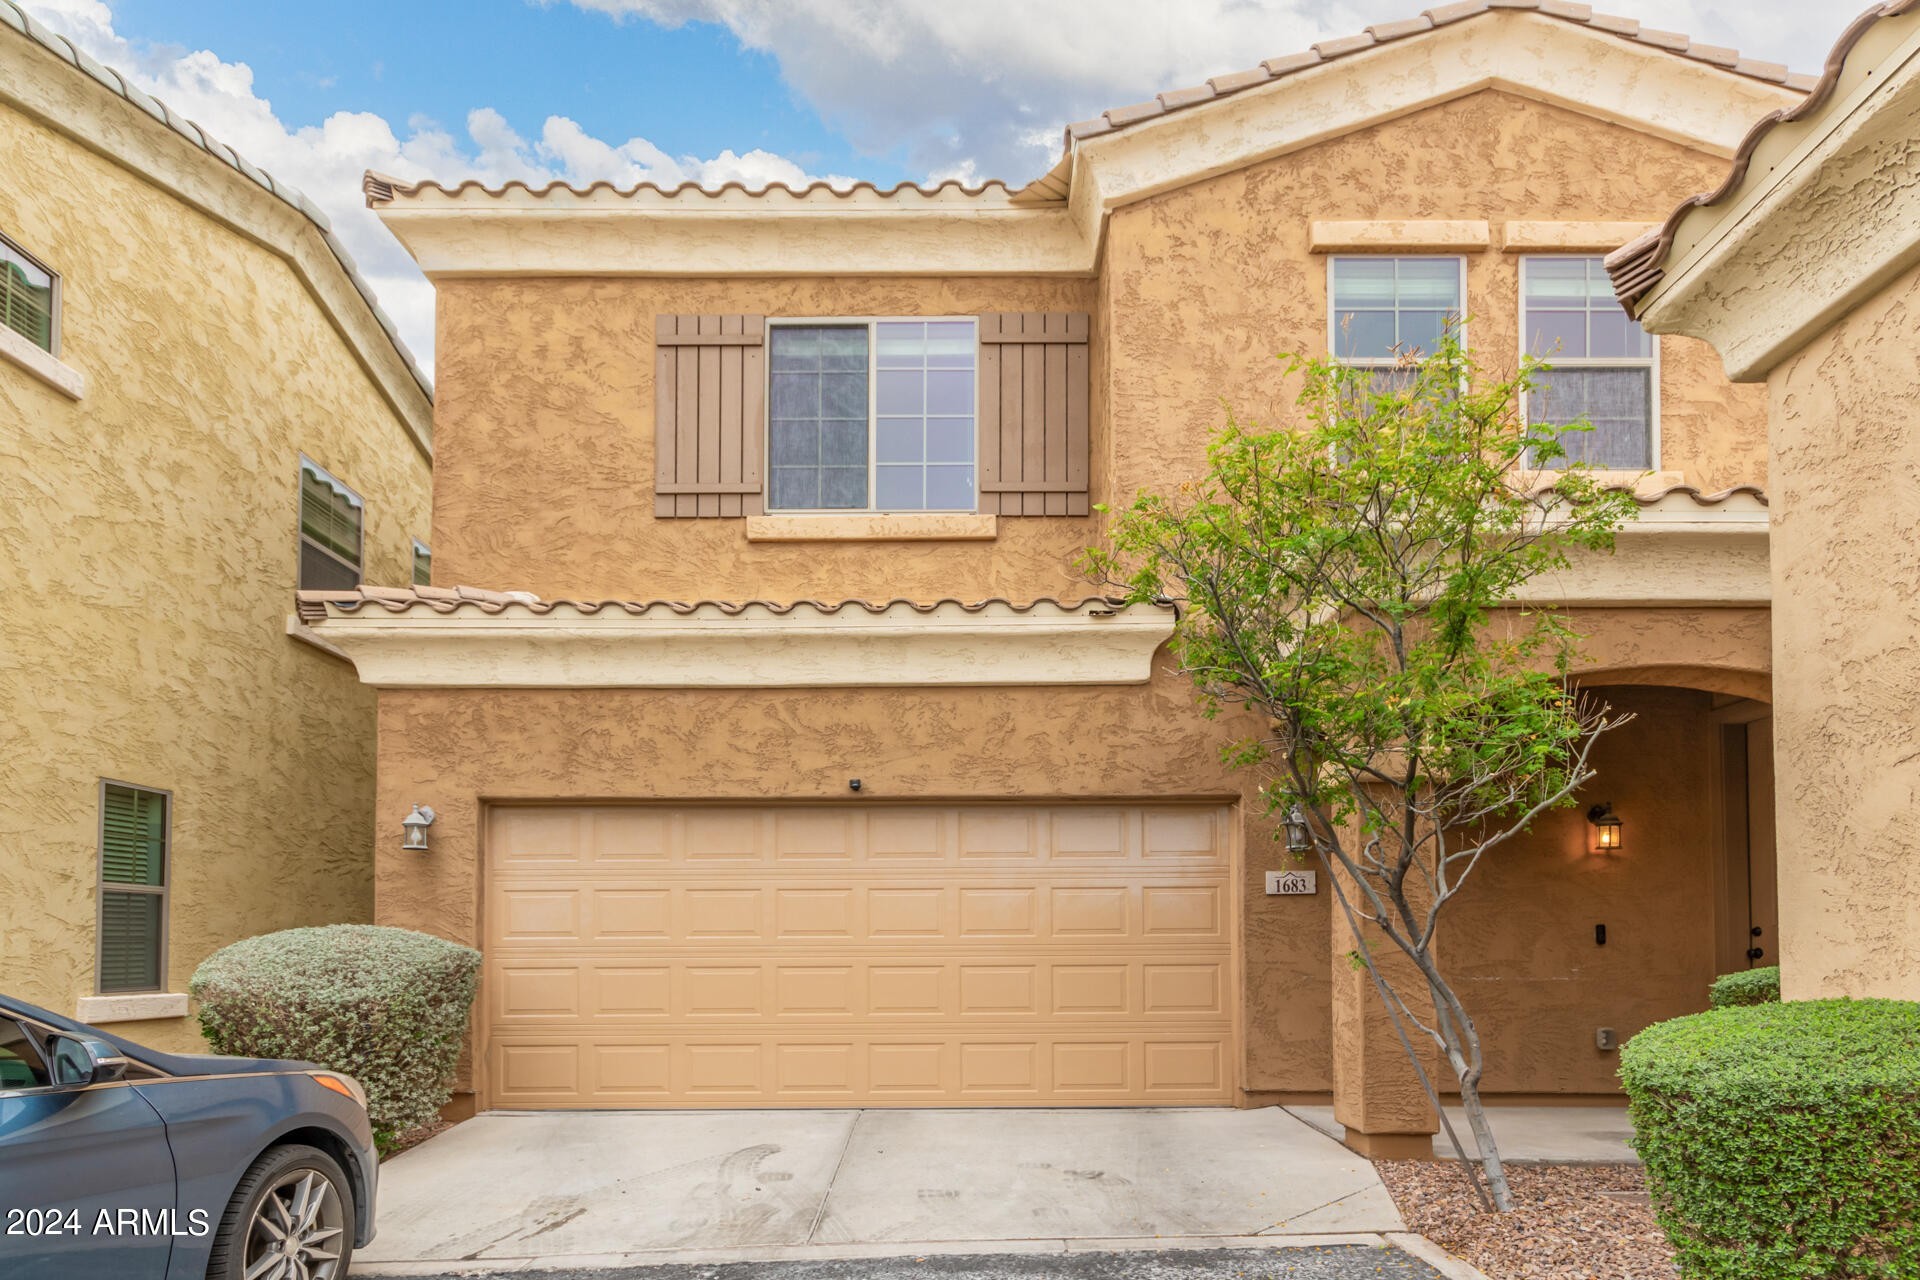 1. 1683 S Desert View Place